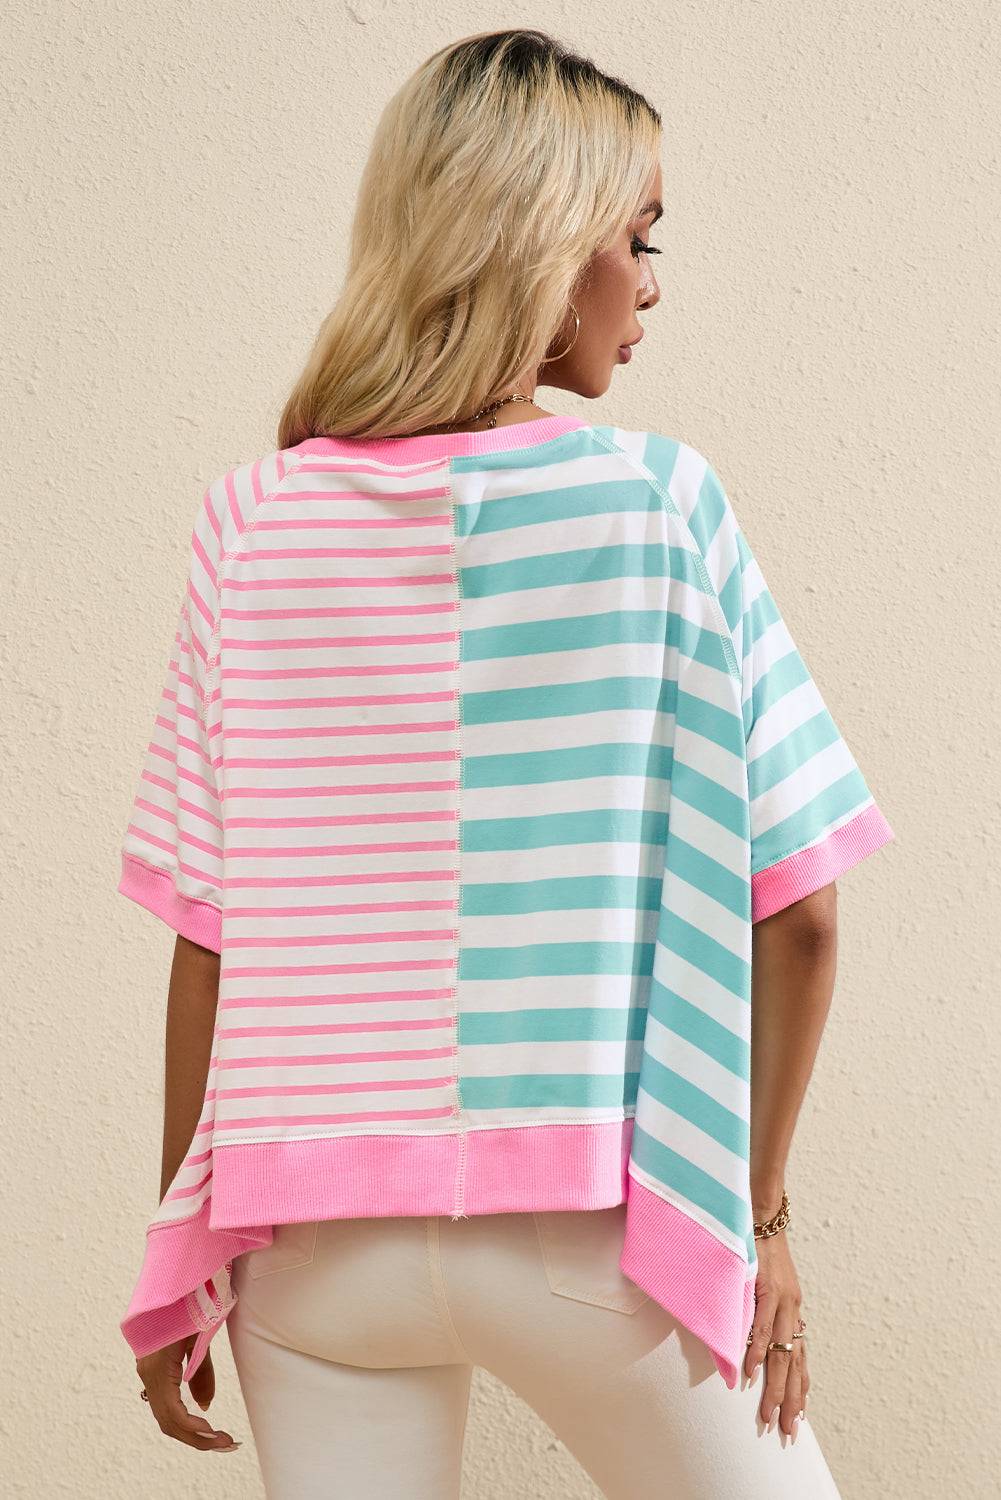 a woman wearing a pink and blue striped top